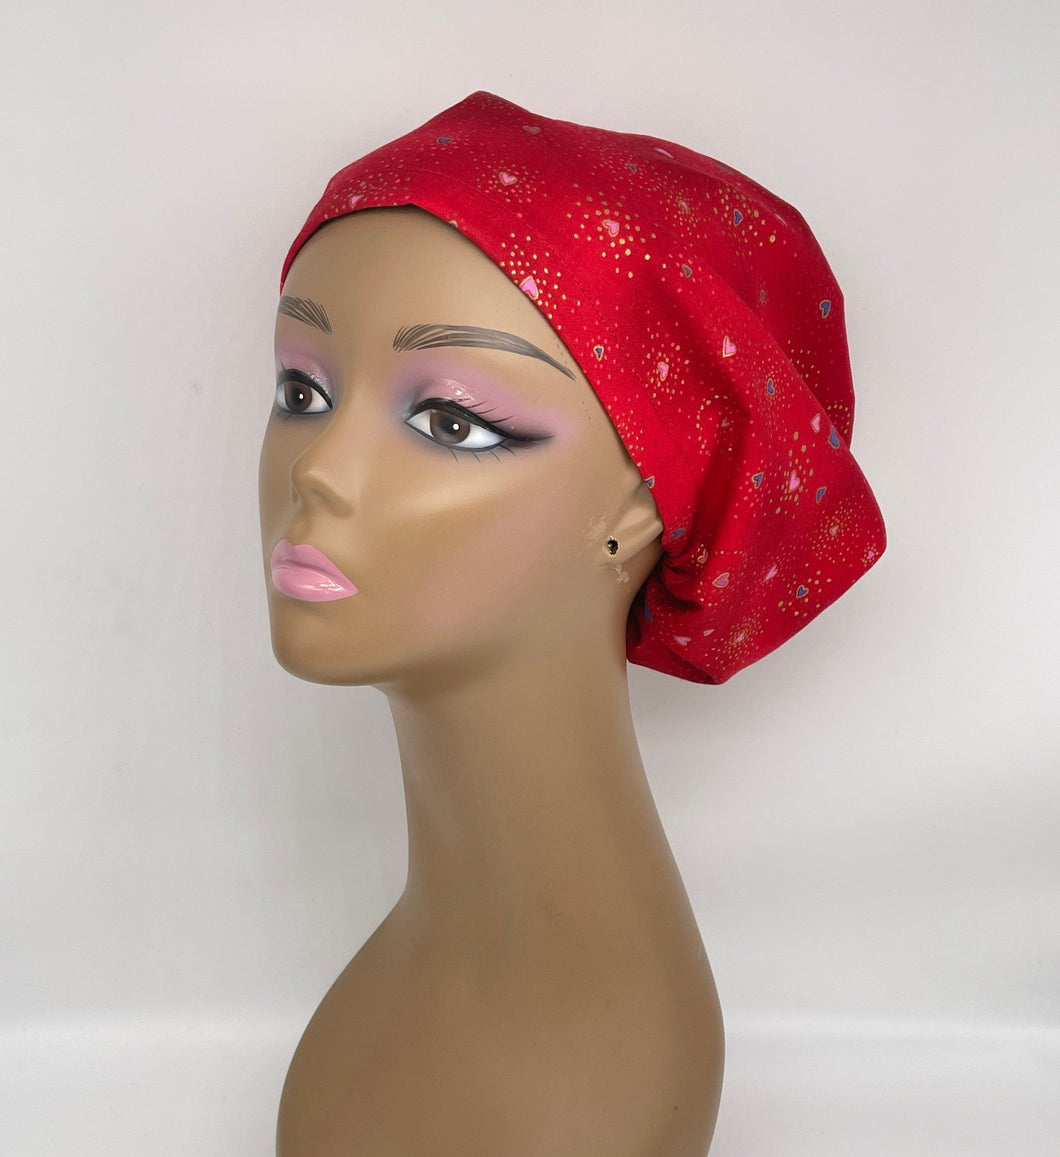 Niceroy surgical SCRUB HAT CAP, Red Love Heart cotton fabric Europe style nursing caps with satin lining option bonnet, nurse gift